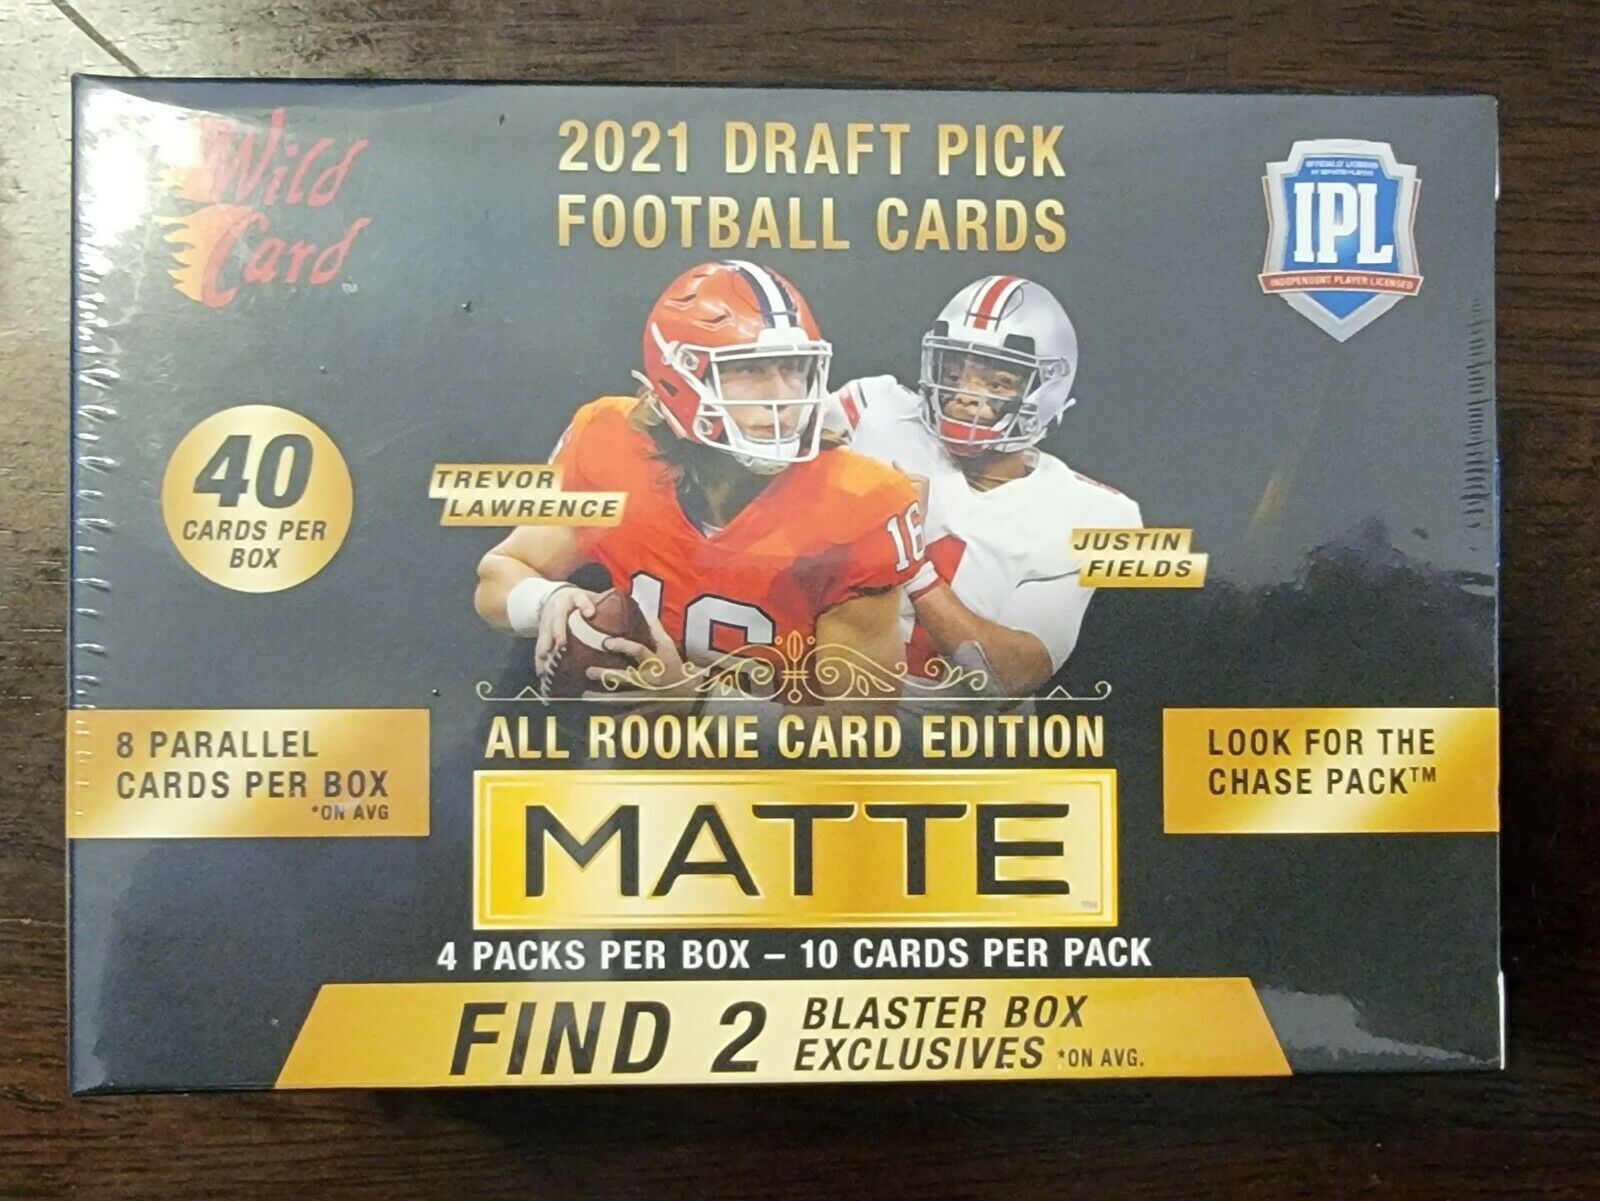   OUT OF STOCK 2021 Wild Card Matte Black Football NFL Blaster Box 